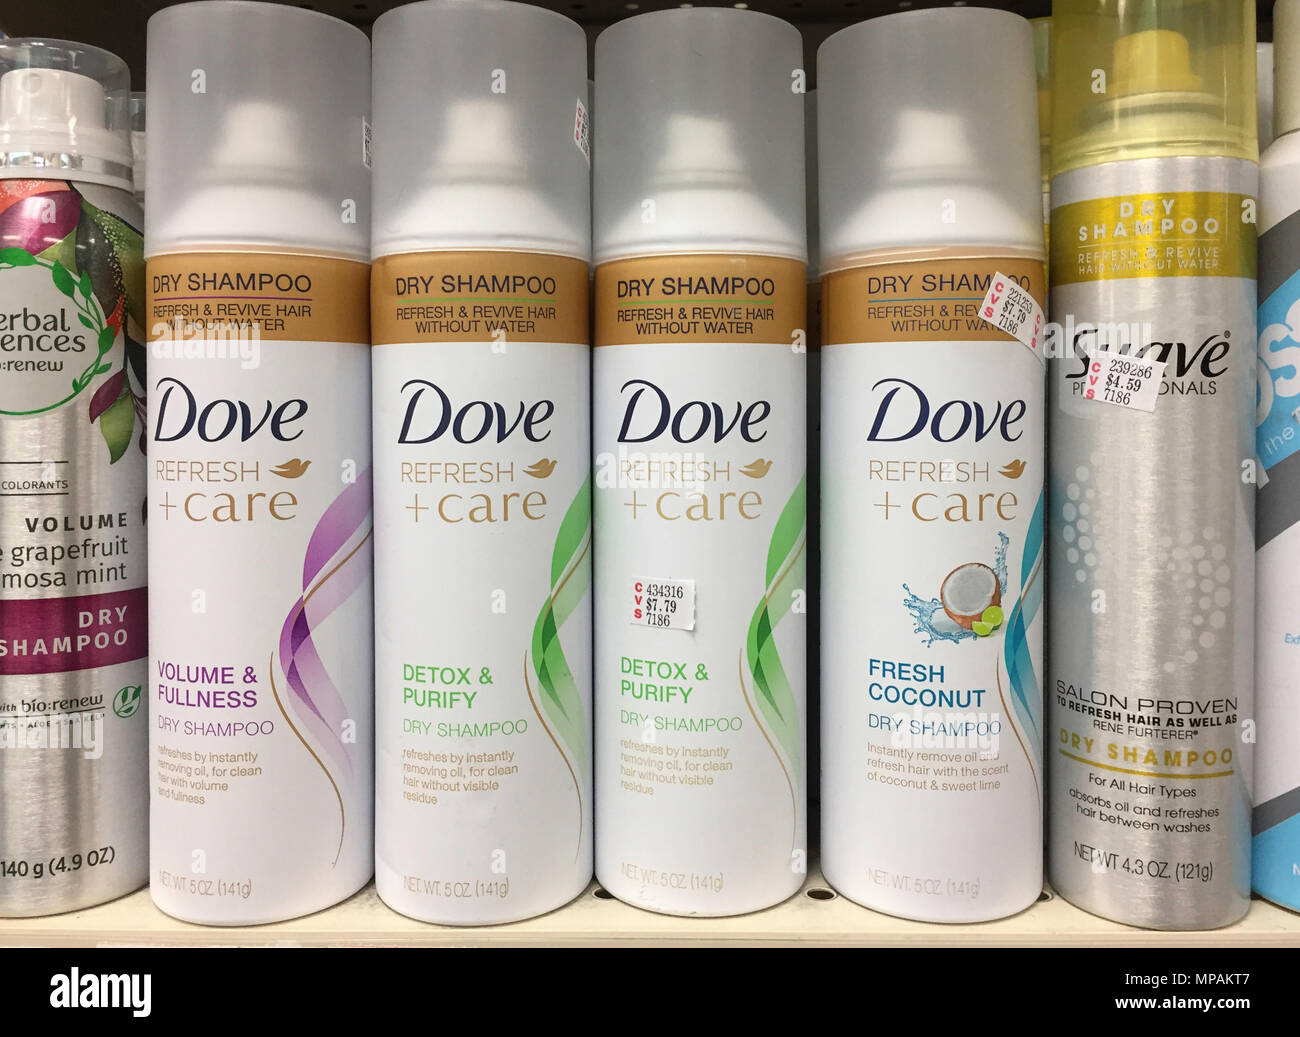 Dry Shampoo High Resolution Stock Photography and Images - Alamy